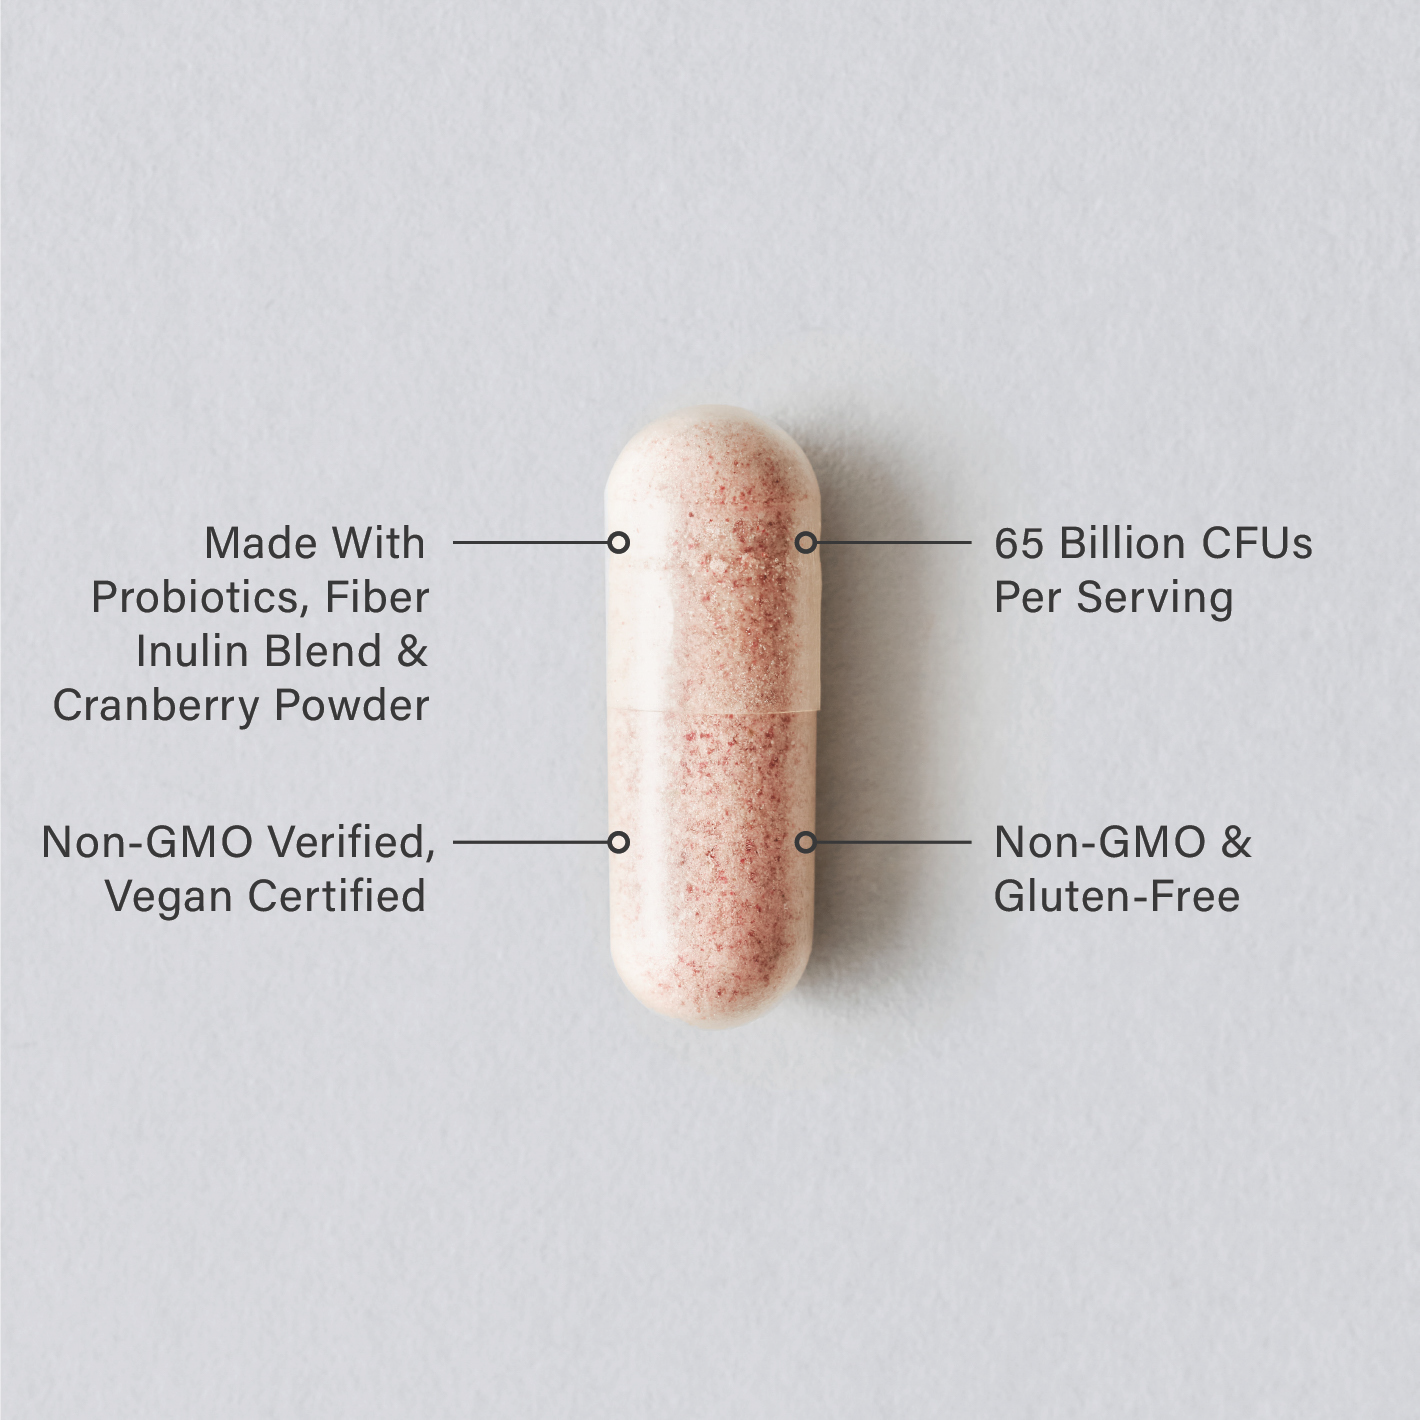 A single Sports Research Women's Probiotic veggie capsule infographic.